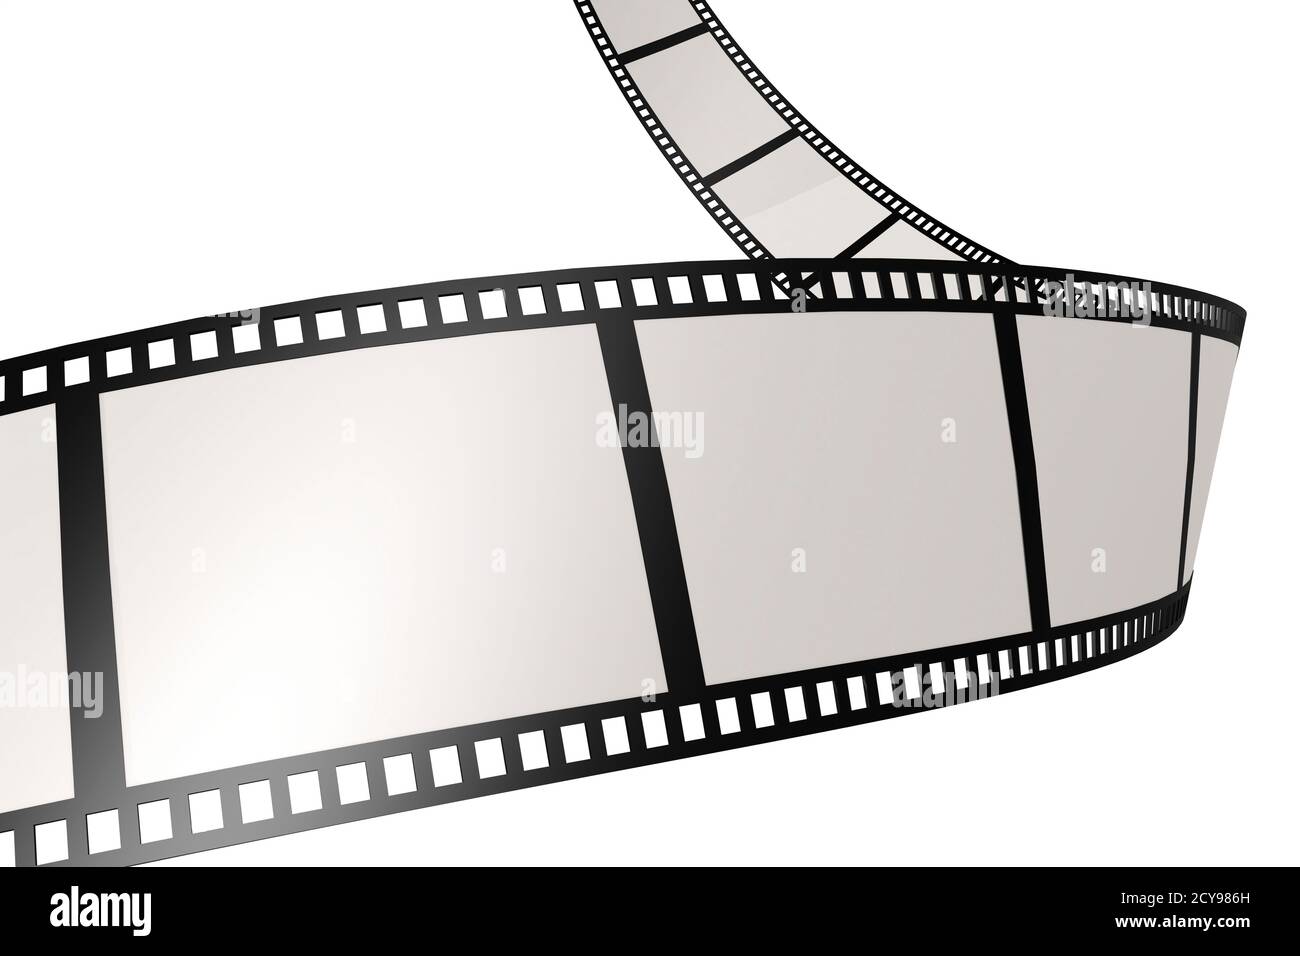 https://c8.alamy.com/comp/2CY986H/old-retro-film-strip-with-empty-frames-3d-rendering-2CY986H.jpg